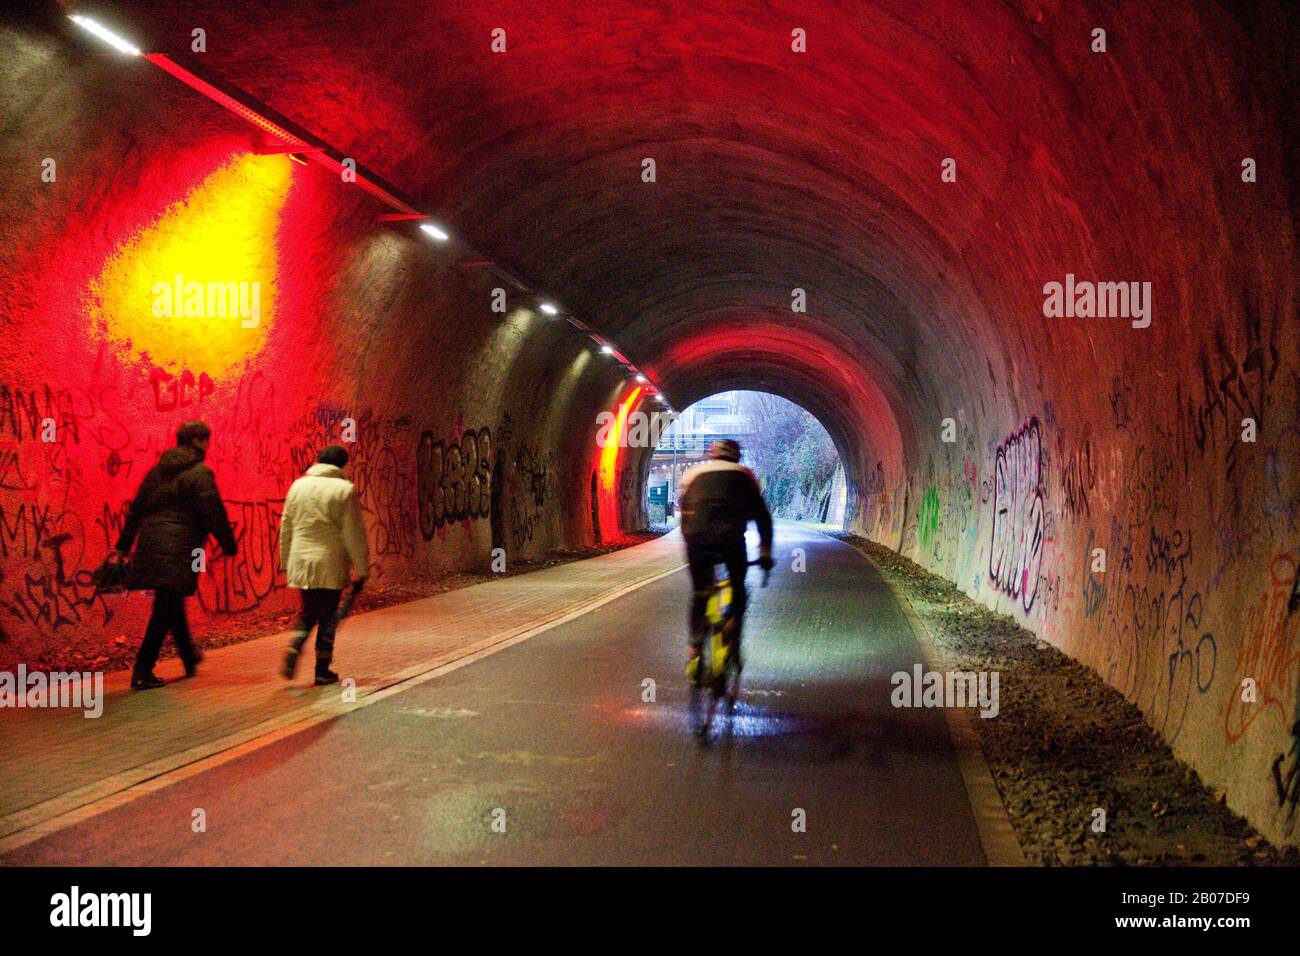 tunnel Dorrenberg, 'Tanztunnel', former rail track, now cycle path in the evening, Germany, North Rhine-Westphalia, Bergisches Land, Wuppertal Stock Photo